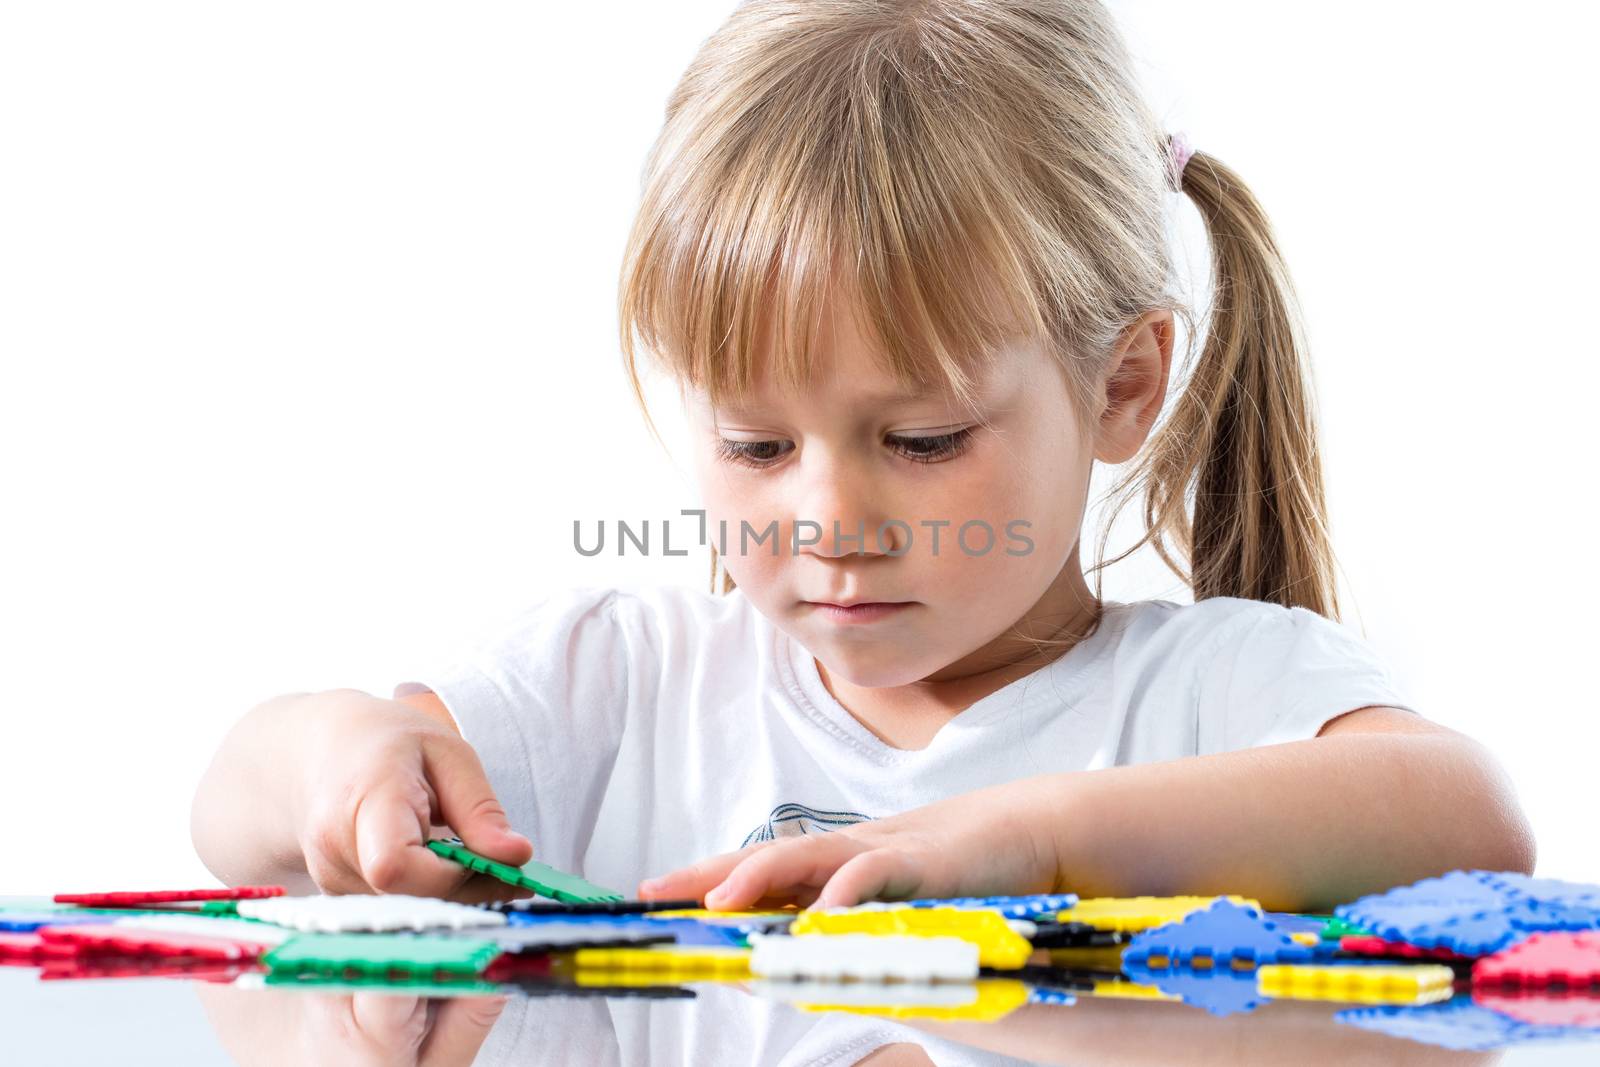 Close up portrait of cute little girl playing with puzzle pieces at table.Isolated on white background.